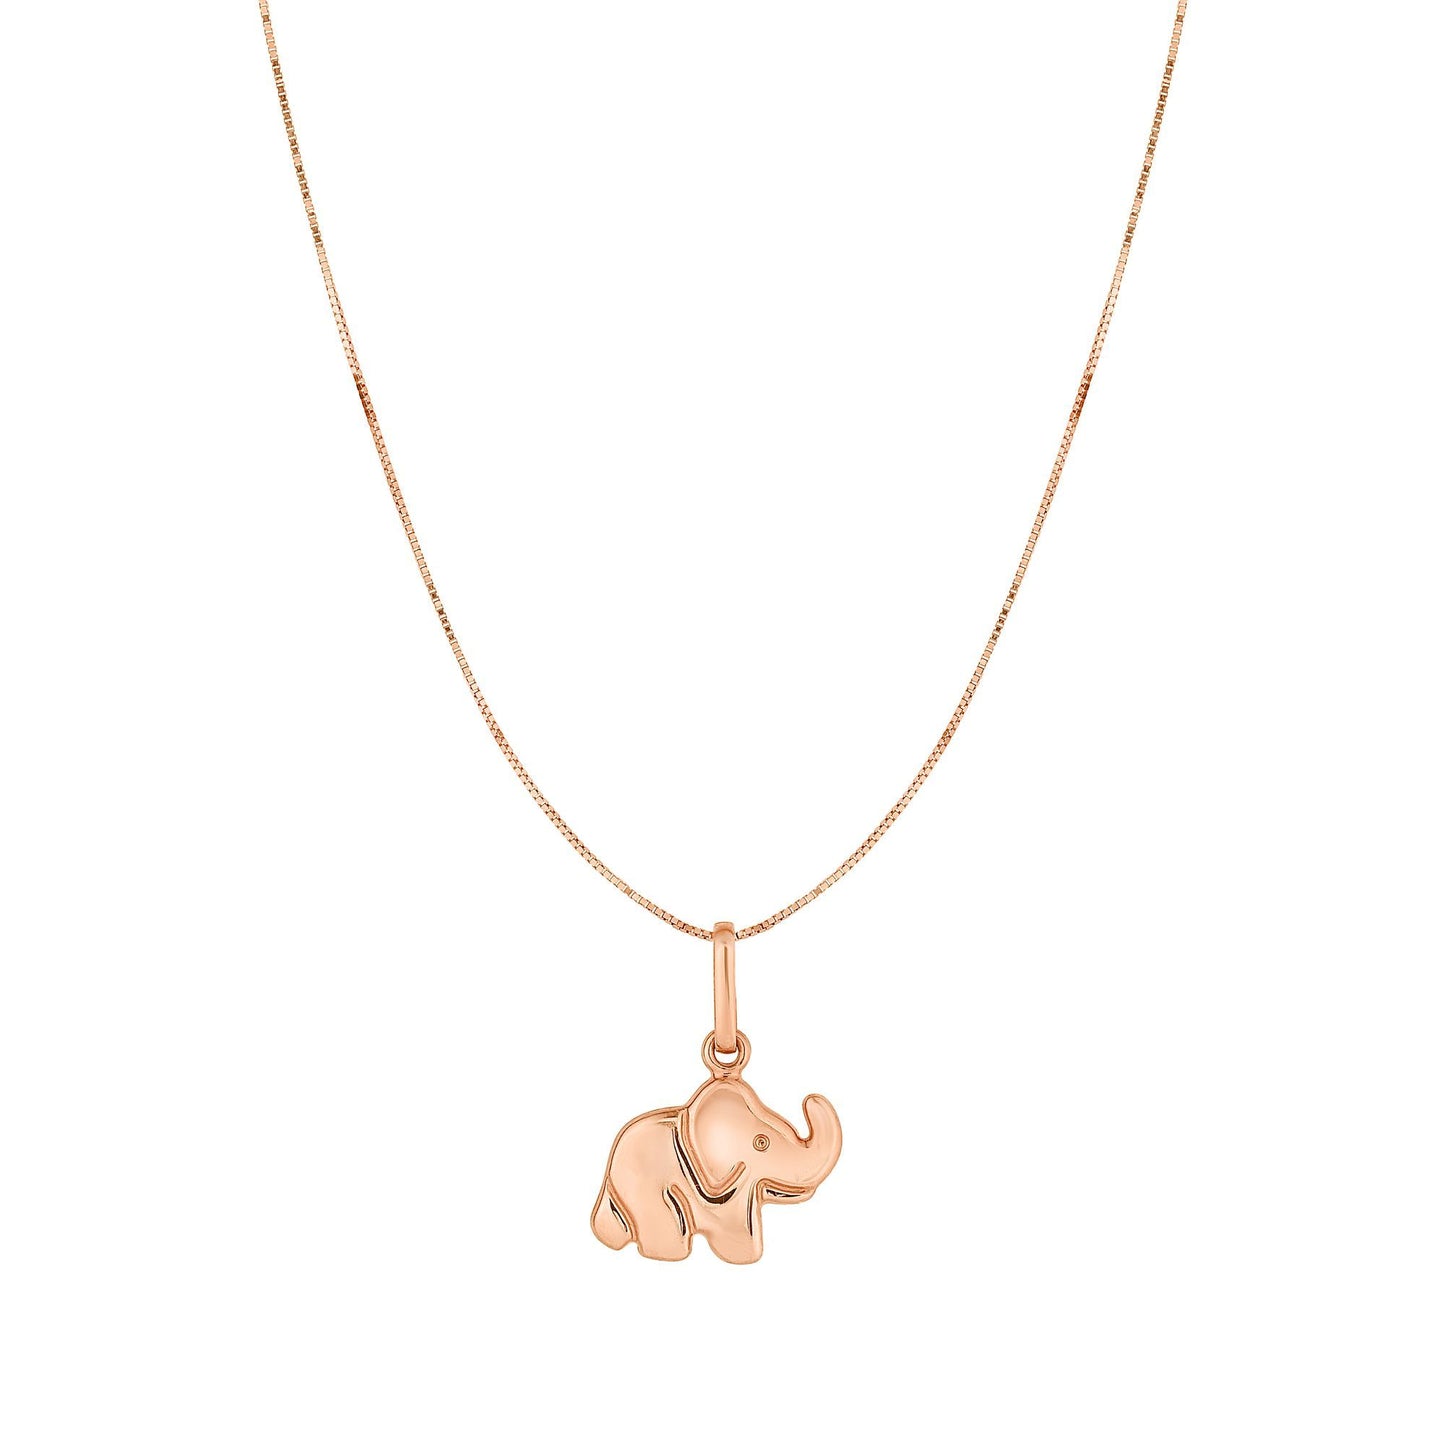 Elephant 10K Gold Rose Shiny Pendant Necklace 18 inches Box Chain For Woman